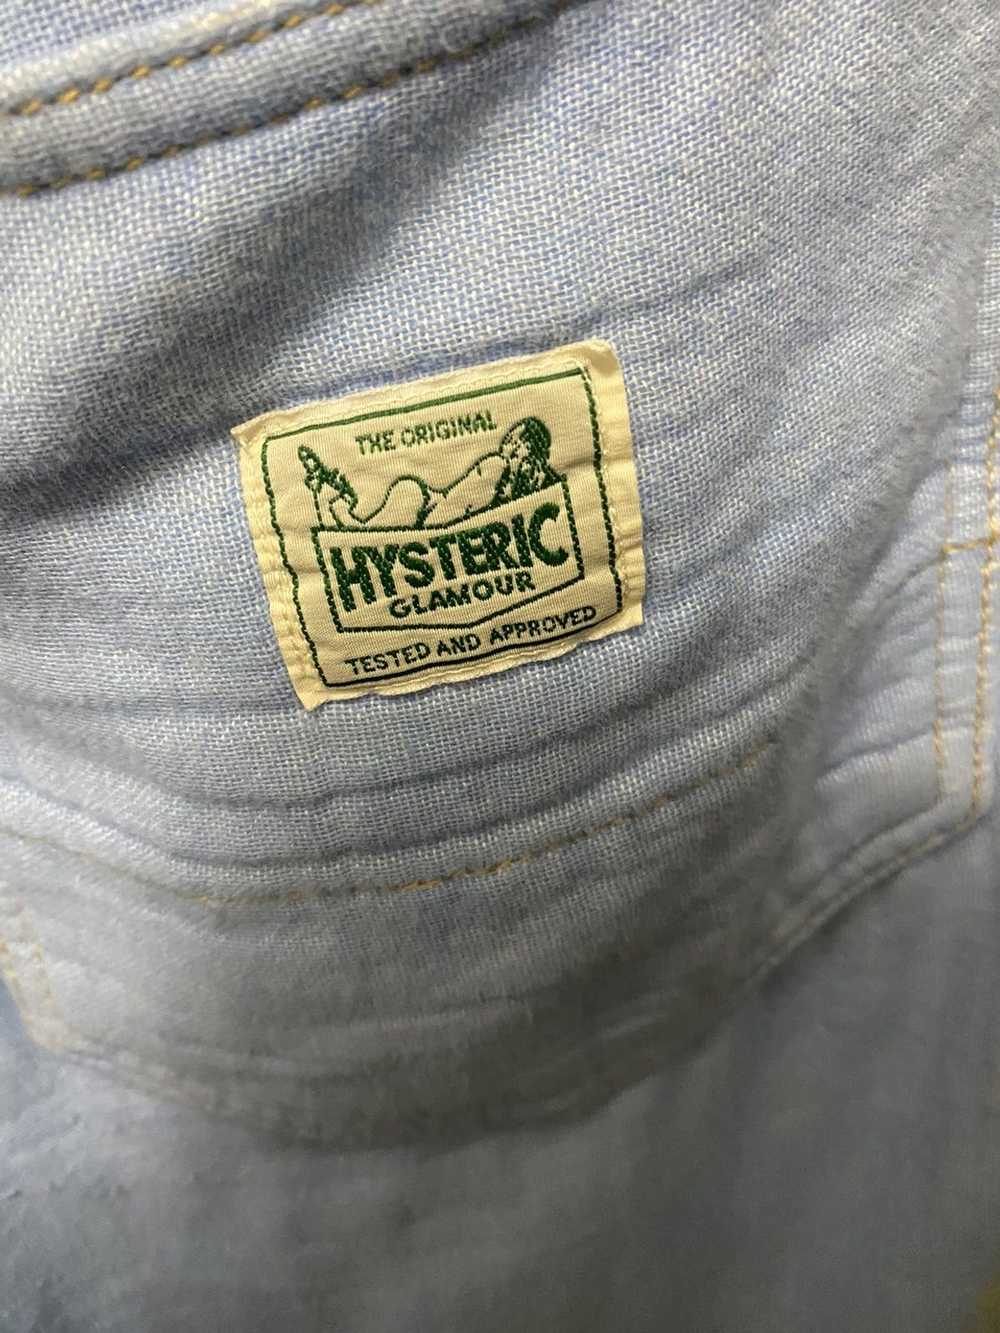 Hysteric Glamour × Japanese Brand × Vintage hyste… - image 3